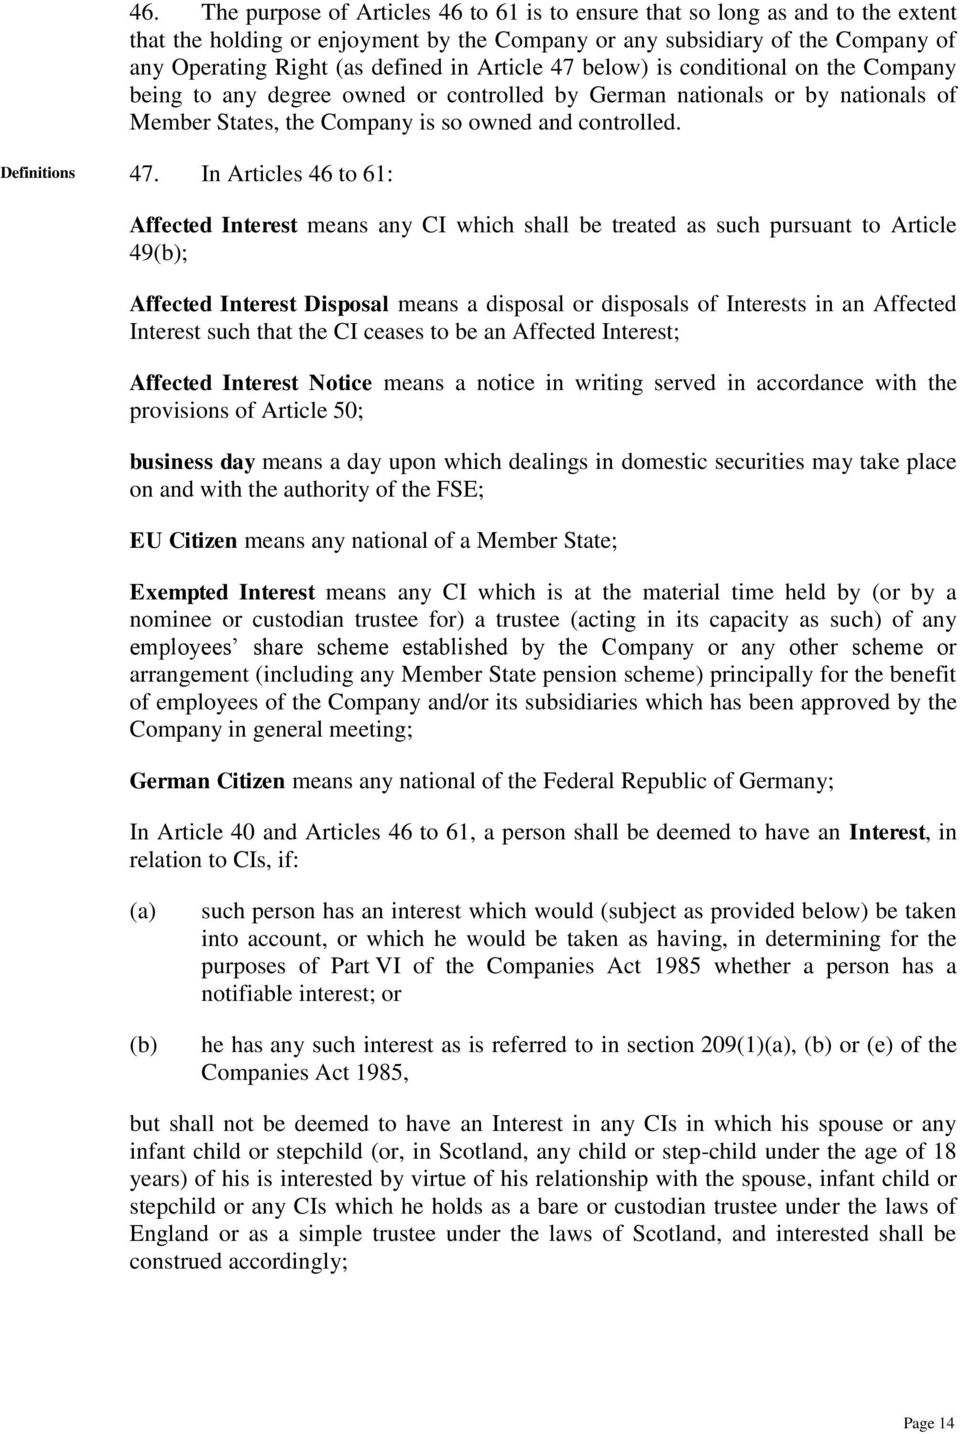 In Articles 46 to 61: Affected Interest means any CI which shall be treated as such pursuant to Article 49; Affected Interest Disposal means a disposal or disposals of Interests in an Affected